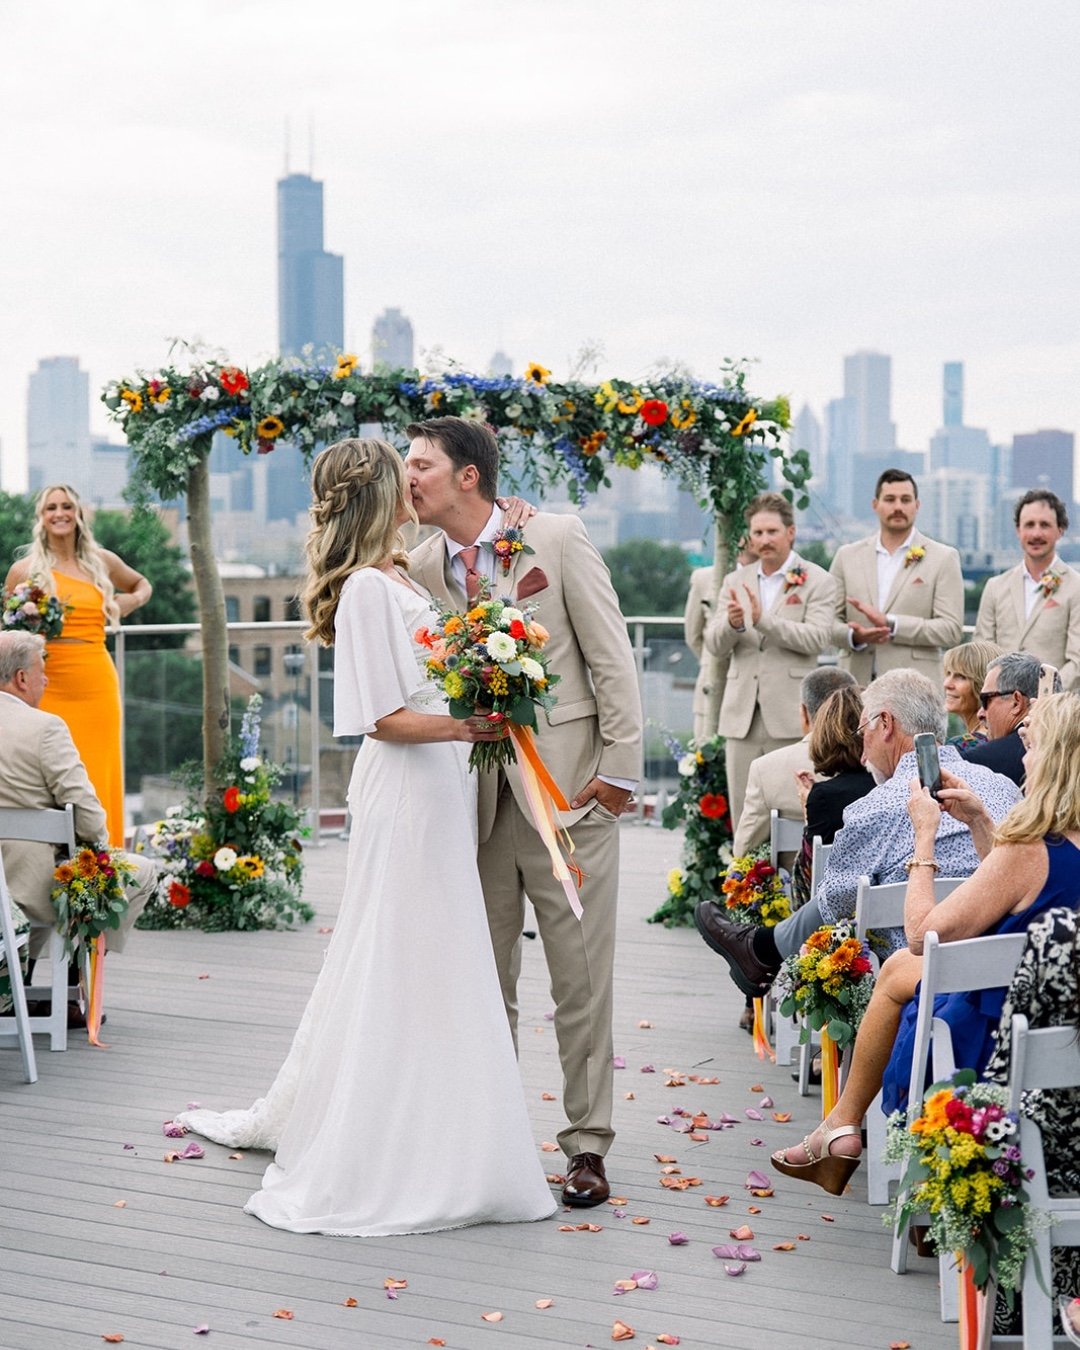 Urban garden vibes with views of Chicago makes our hearts skip a beat 💐💕

📸 @mandelette
🥂 @bigcitybride
.
.
.
#lacunaevents #lacunalofts #chicagoeventvenue #chicagowedding #rooftopwedding #weddingphotography #ChicagoWeddings #ChicagoEvents #bride